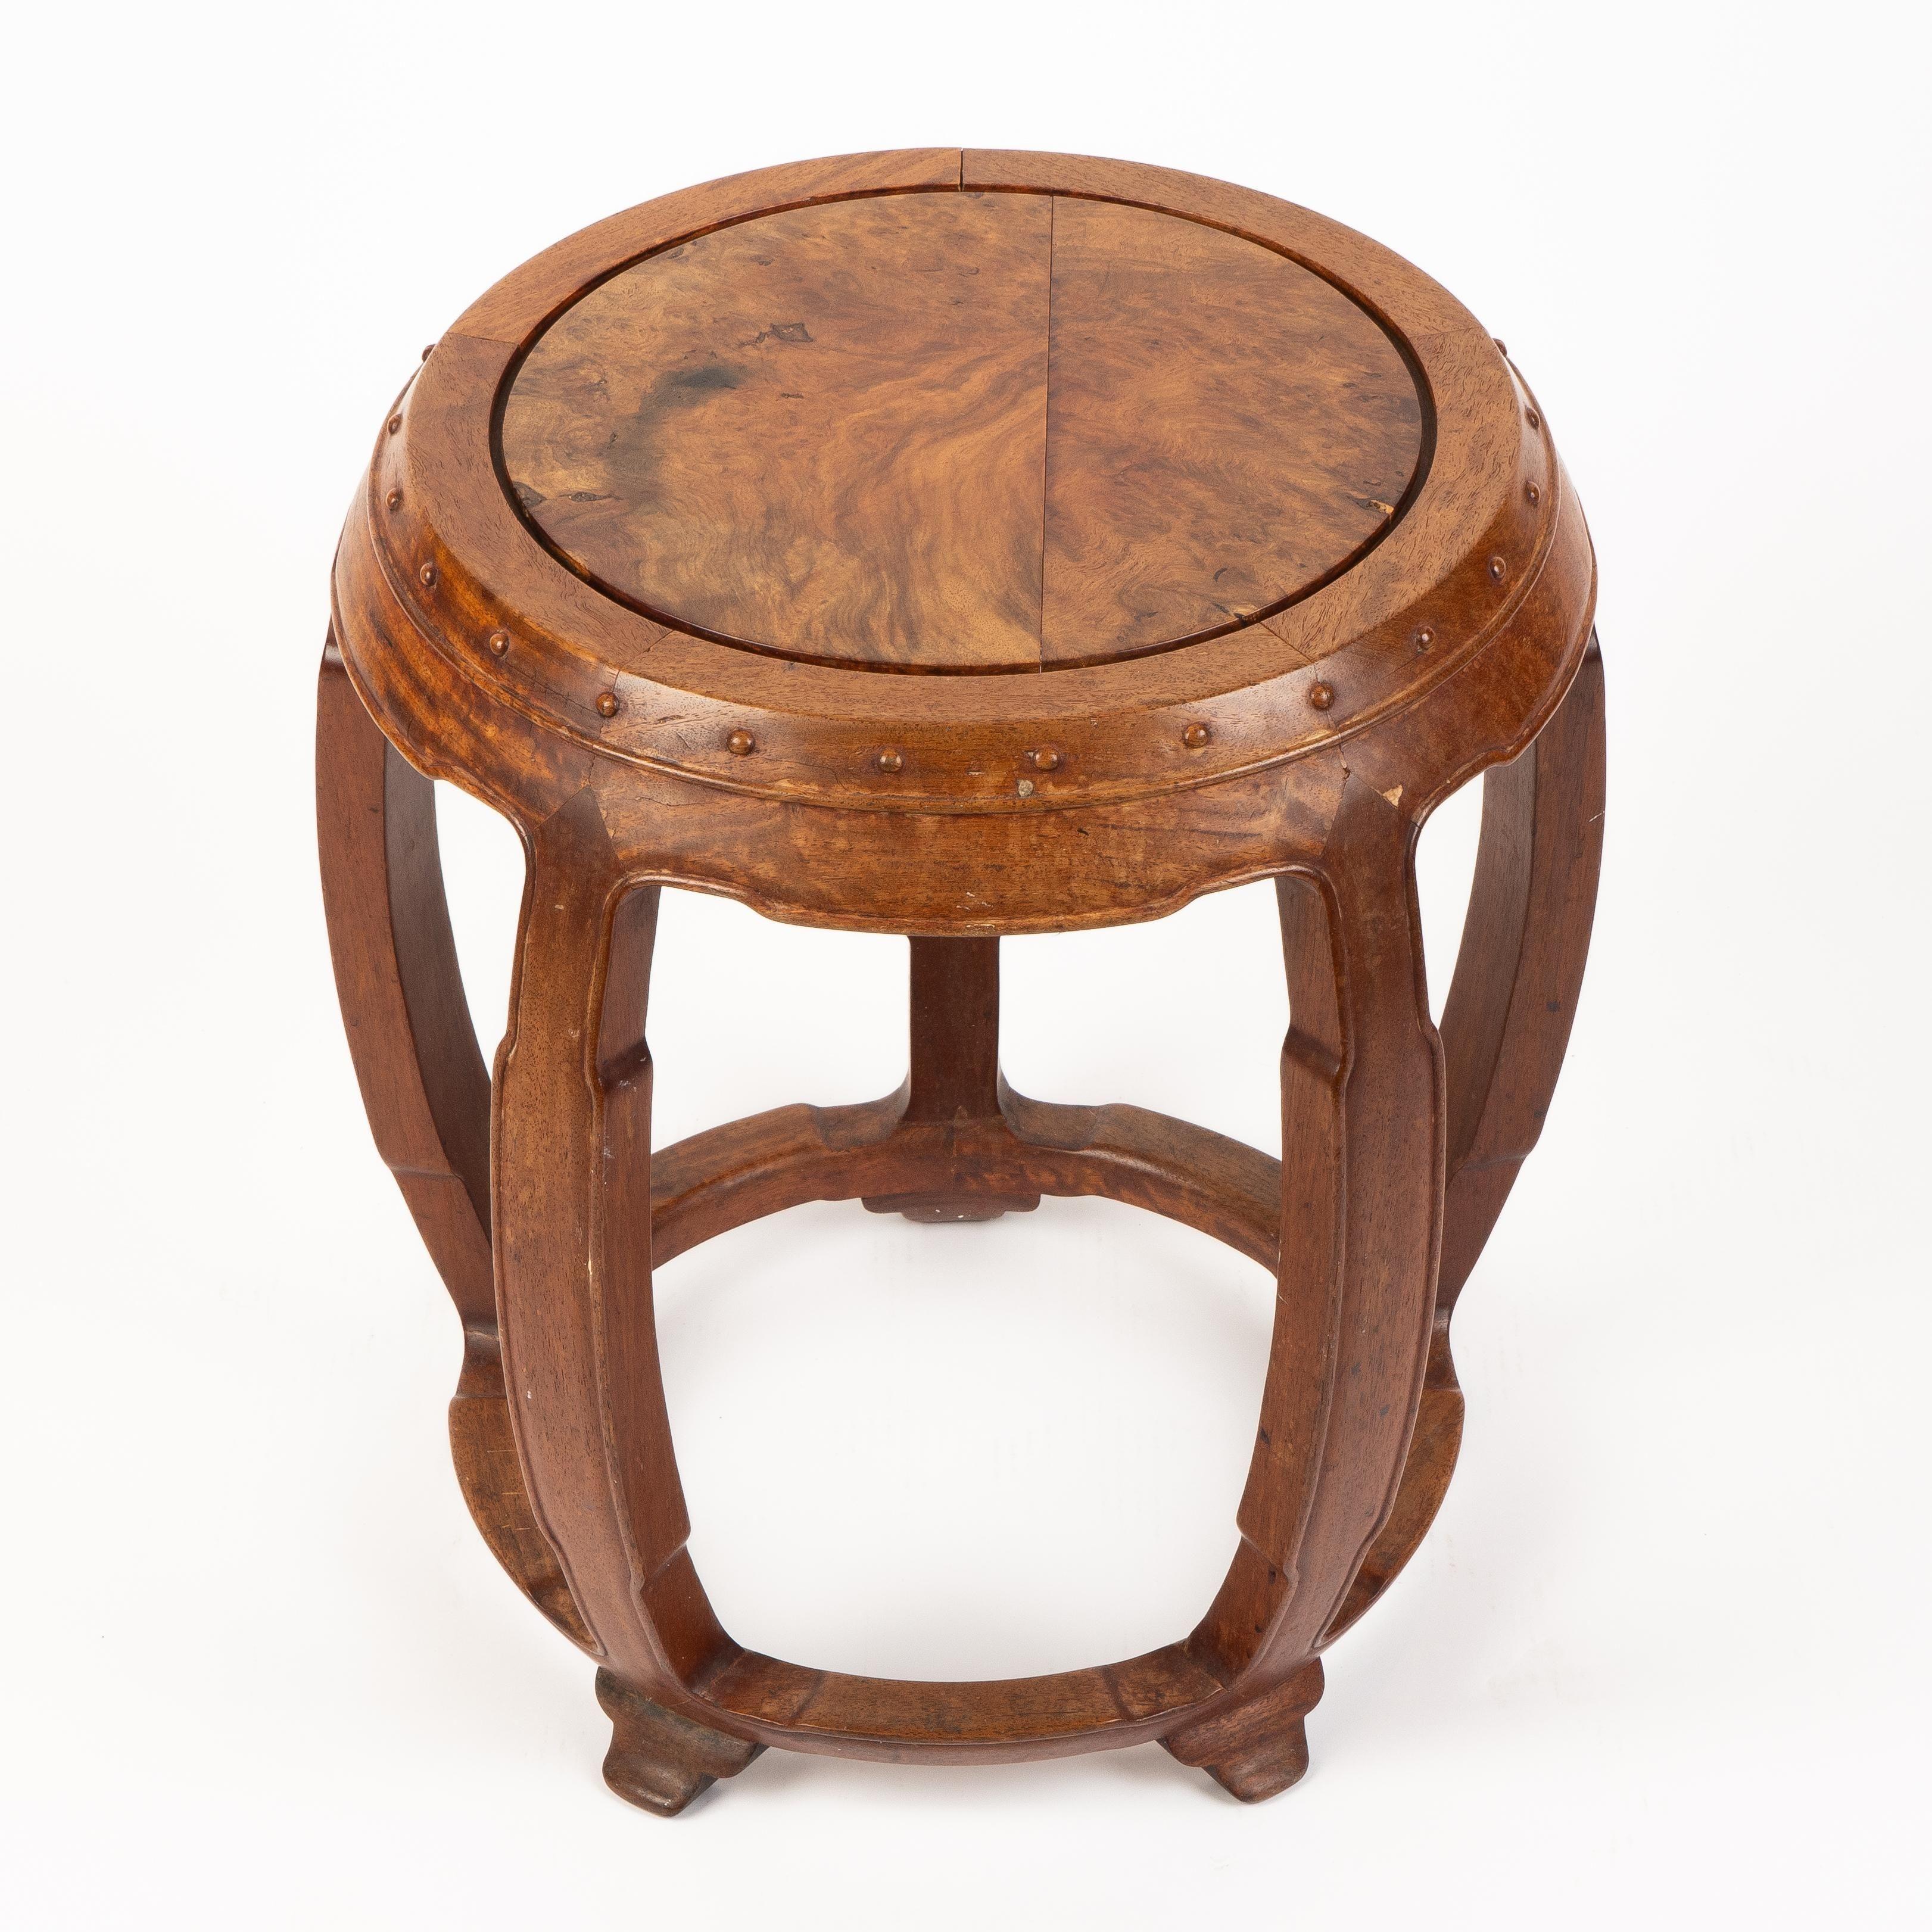 Chinese rosewood barrel shaped garden seat with a burl rosewood top. From the Republic period, in the Ming Dynasty taste.
China, circa 1912-1949.